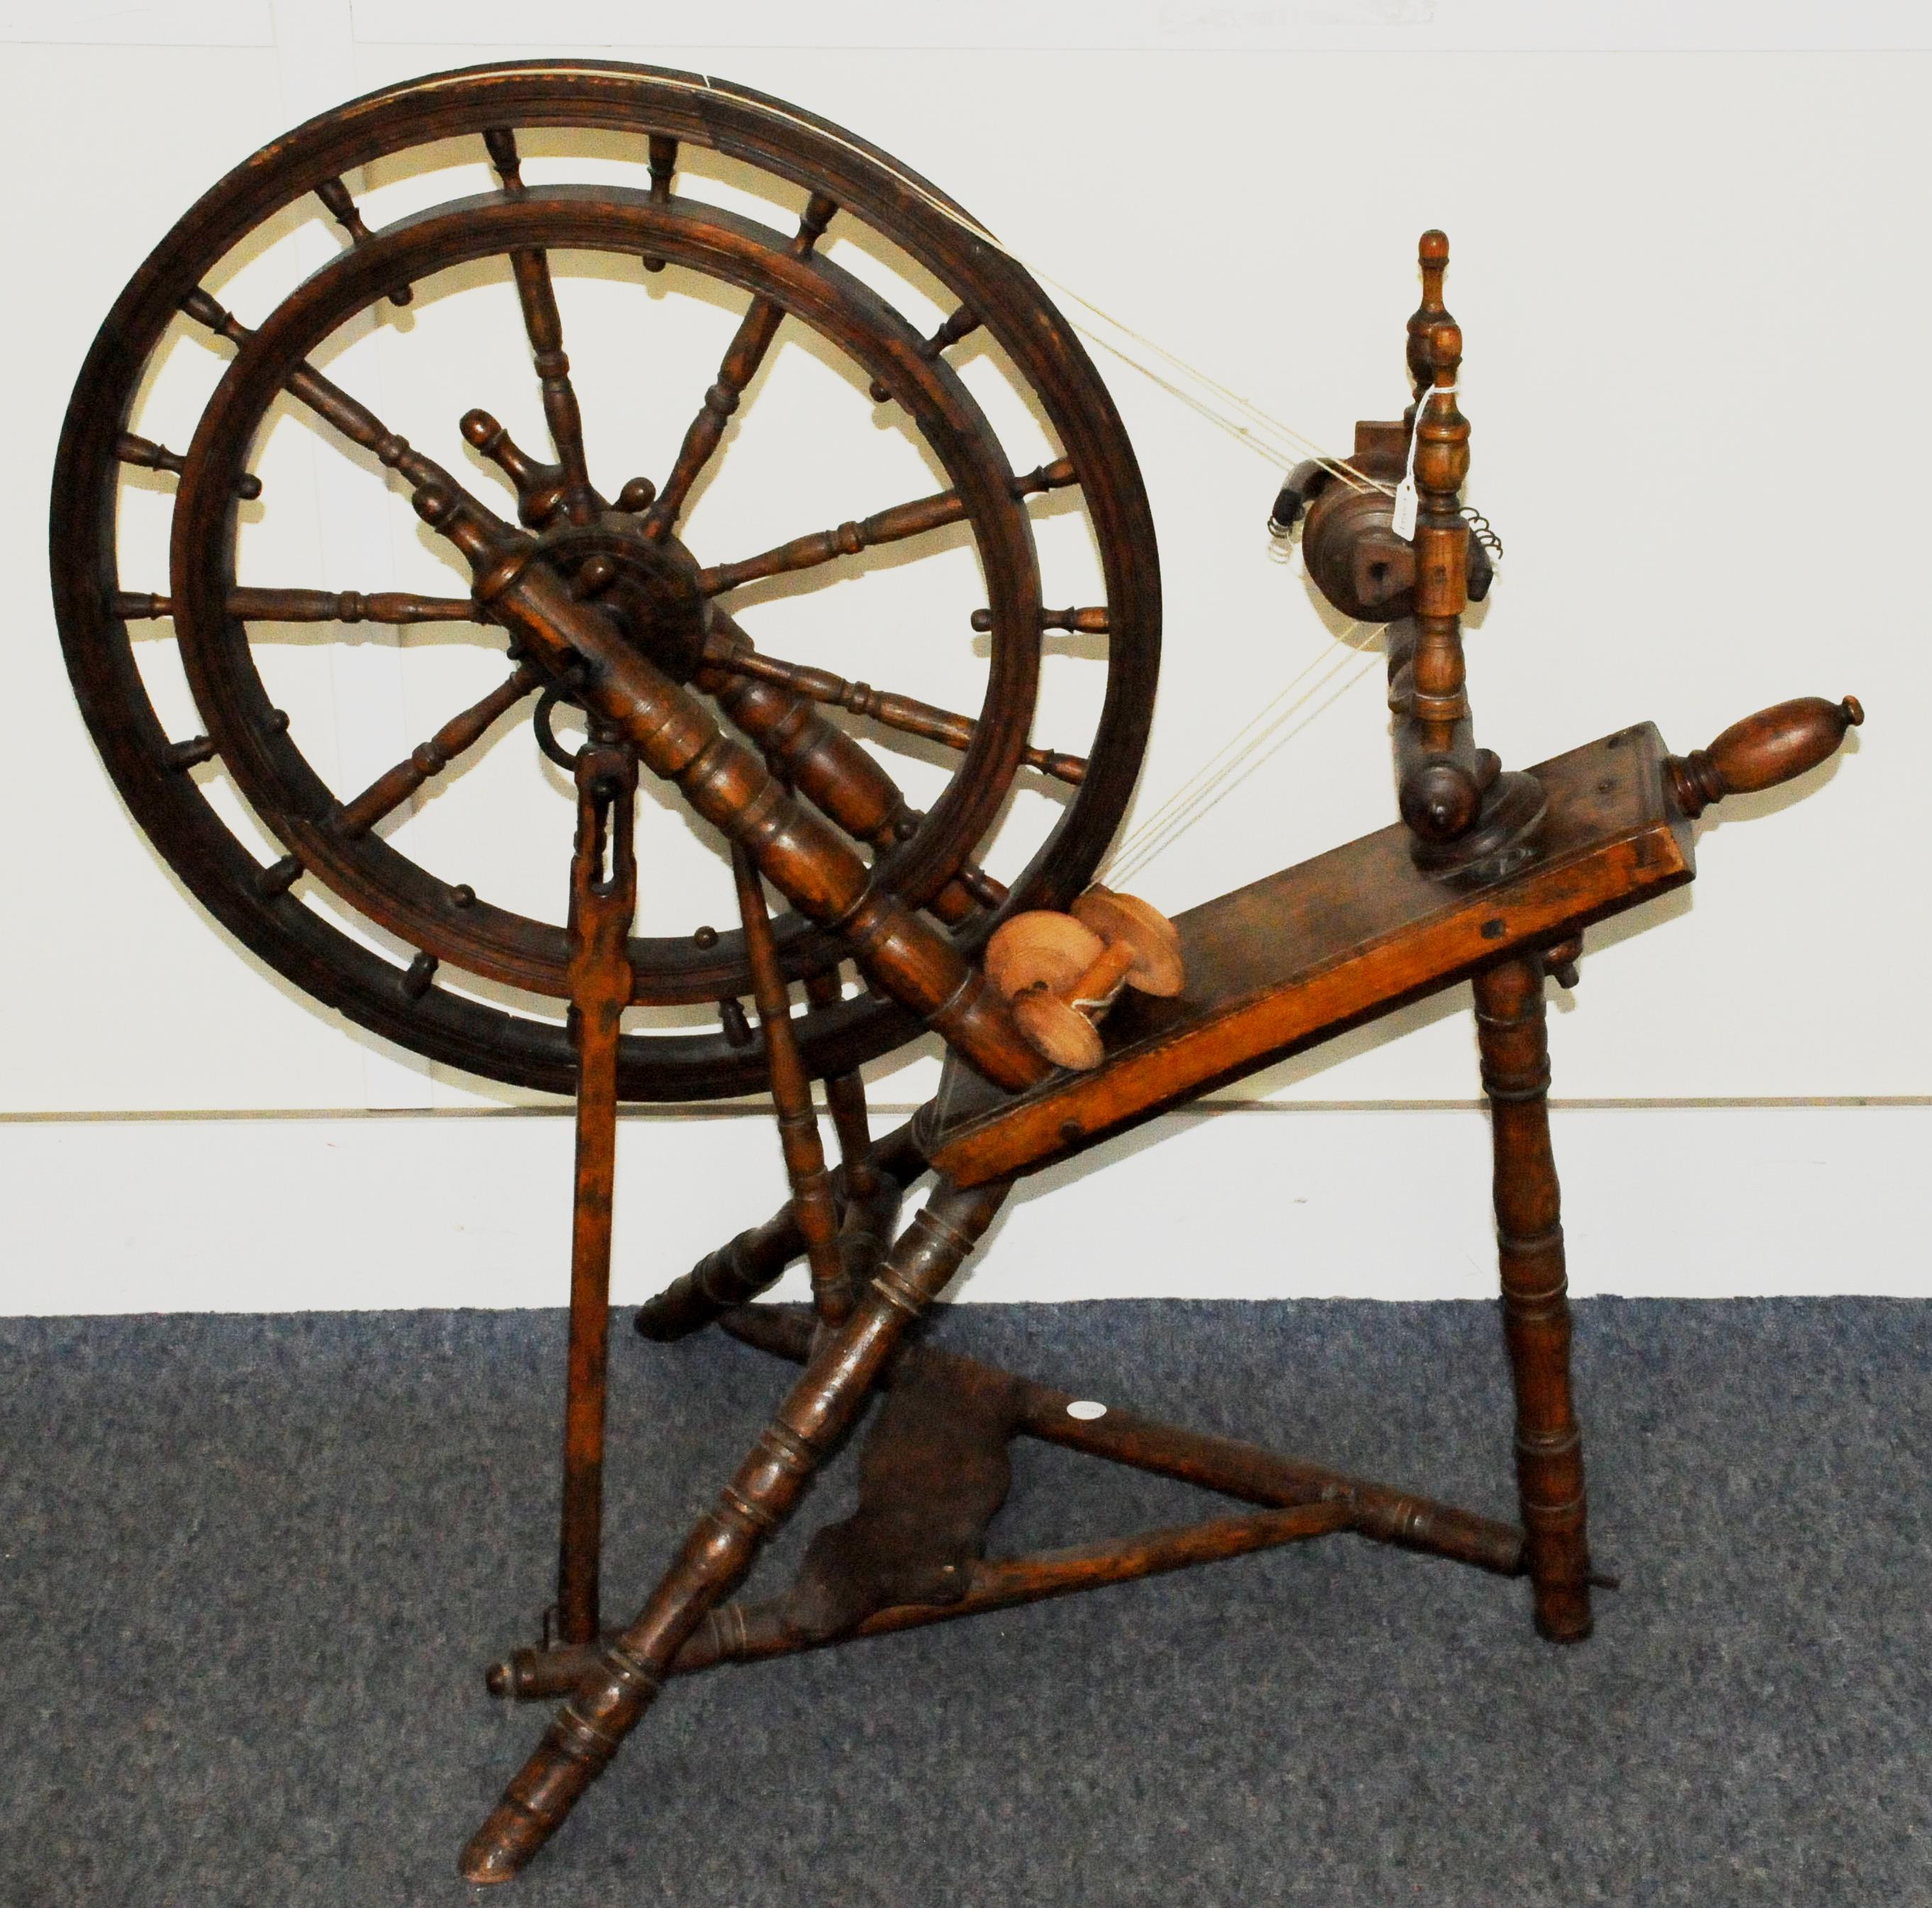 An antique hardwood spinning wheel, with cast iron fittings, overall in fair condition but some